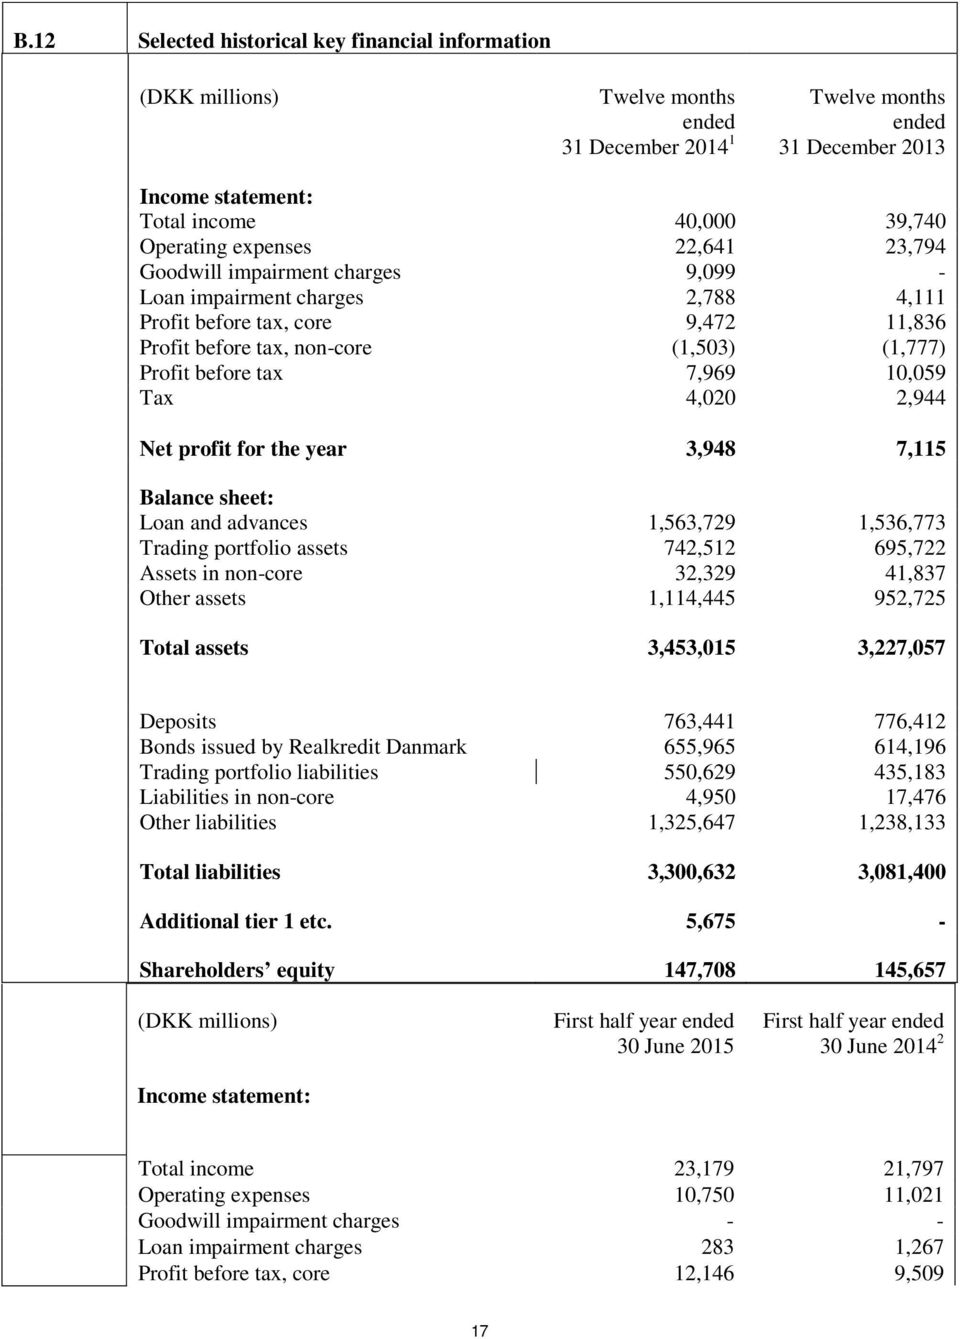 10,059 Tax 4,020 2,944 Net profit for the year 3,948 7,115 Balance sheet: Loan and advances 1,563,729 1,536,773 Trading portfolio assets 742,512 695,722 Assets in non-core 32,329 41,837 Other assets